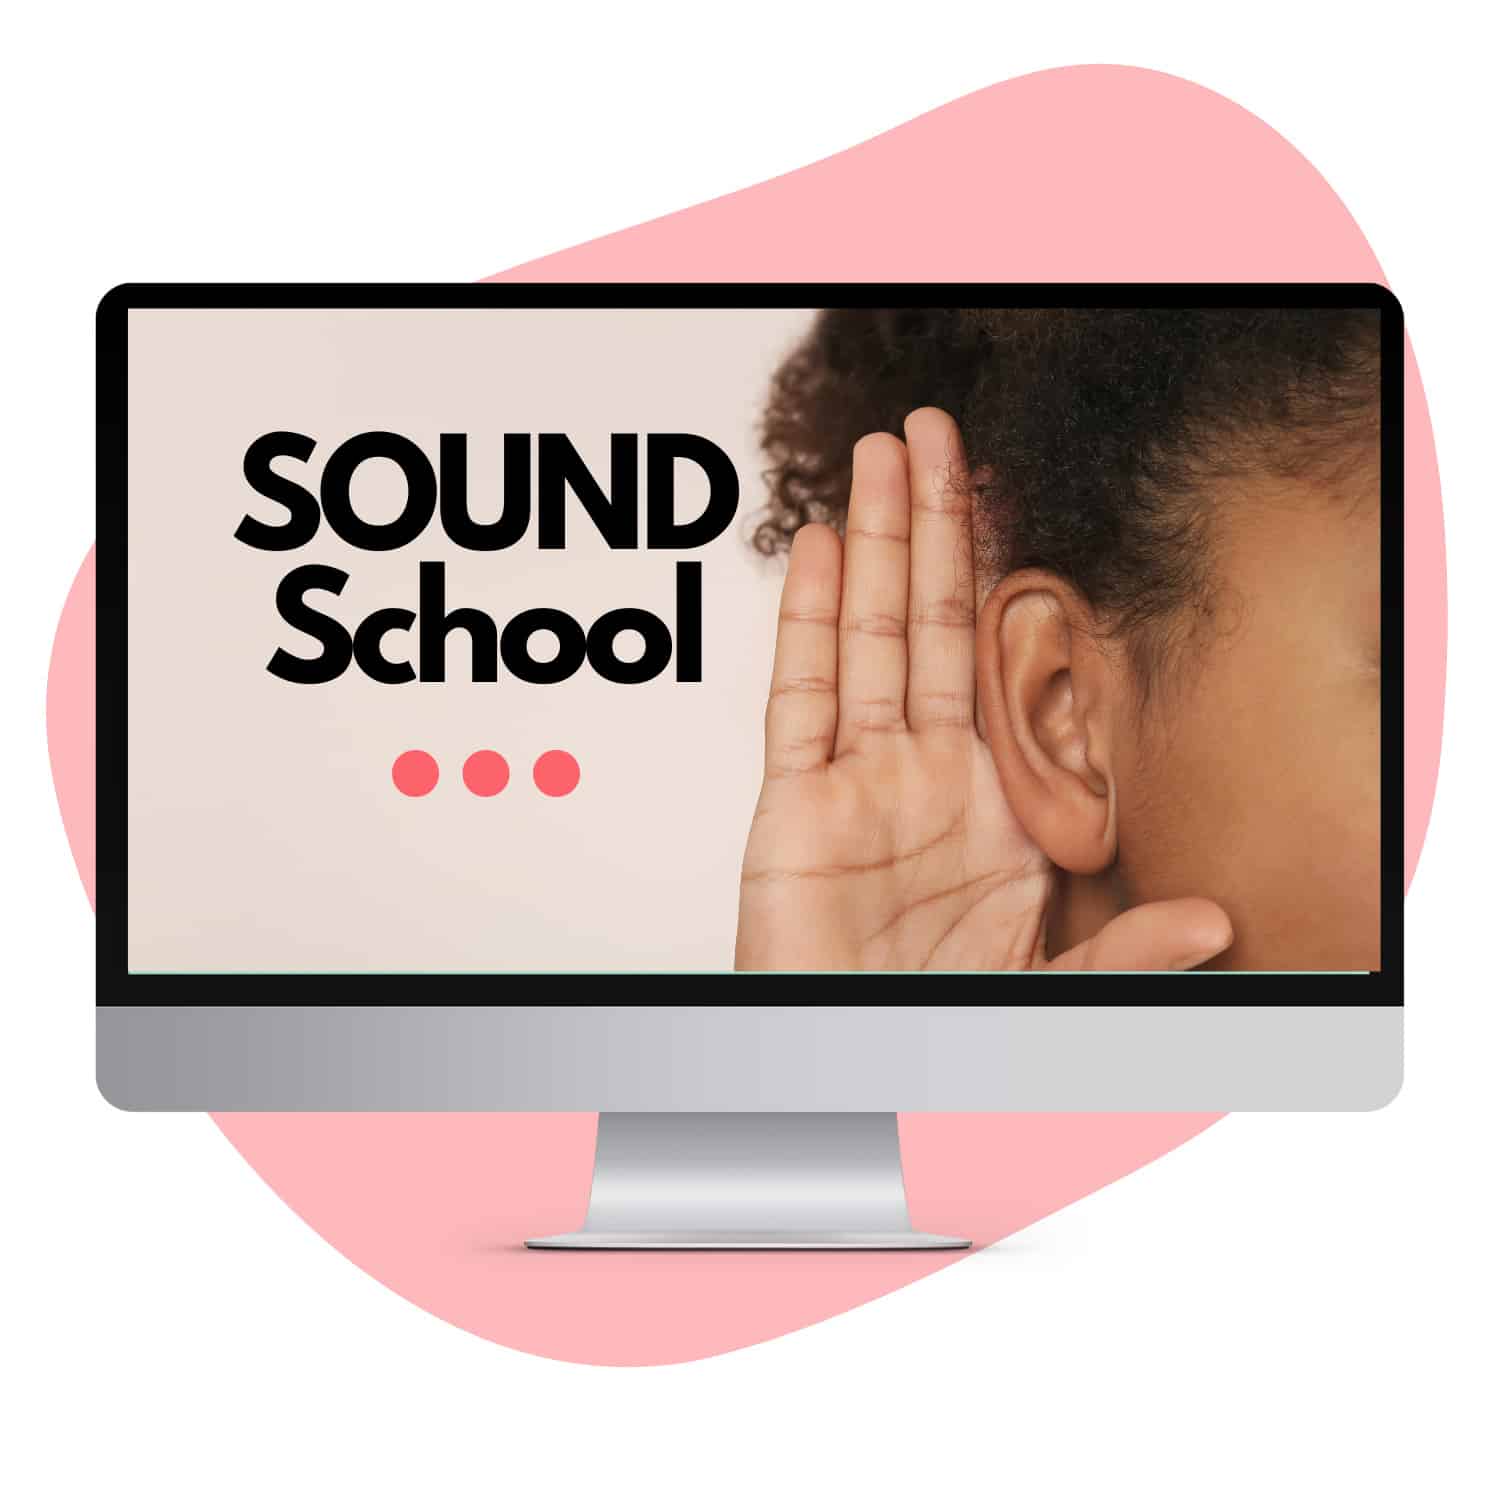 sounds school for parents to learn letter sounds like the short i sound vowel. Image has a pink background with the a computer monitor that displays a picture of a black girl with her hand to her ear.